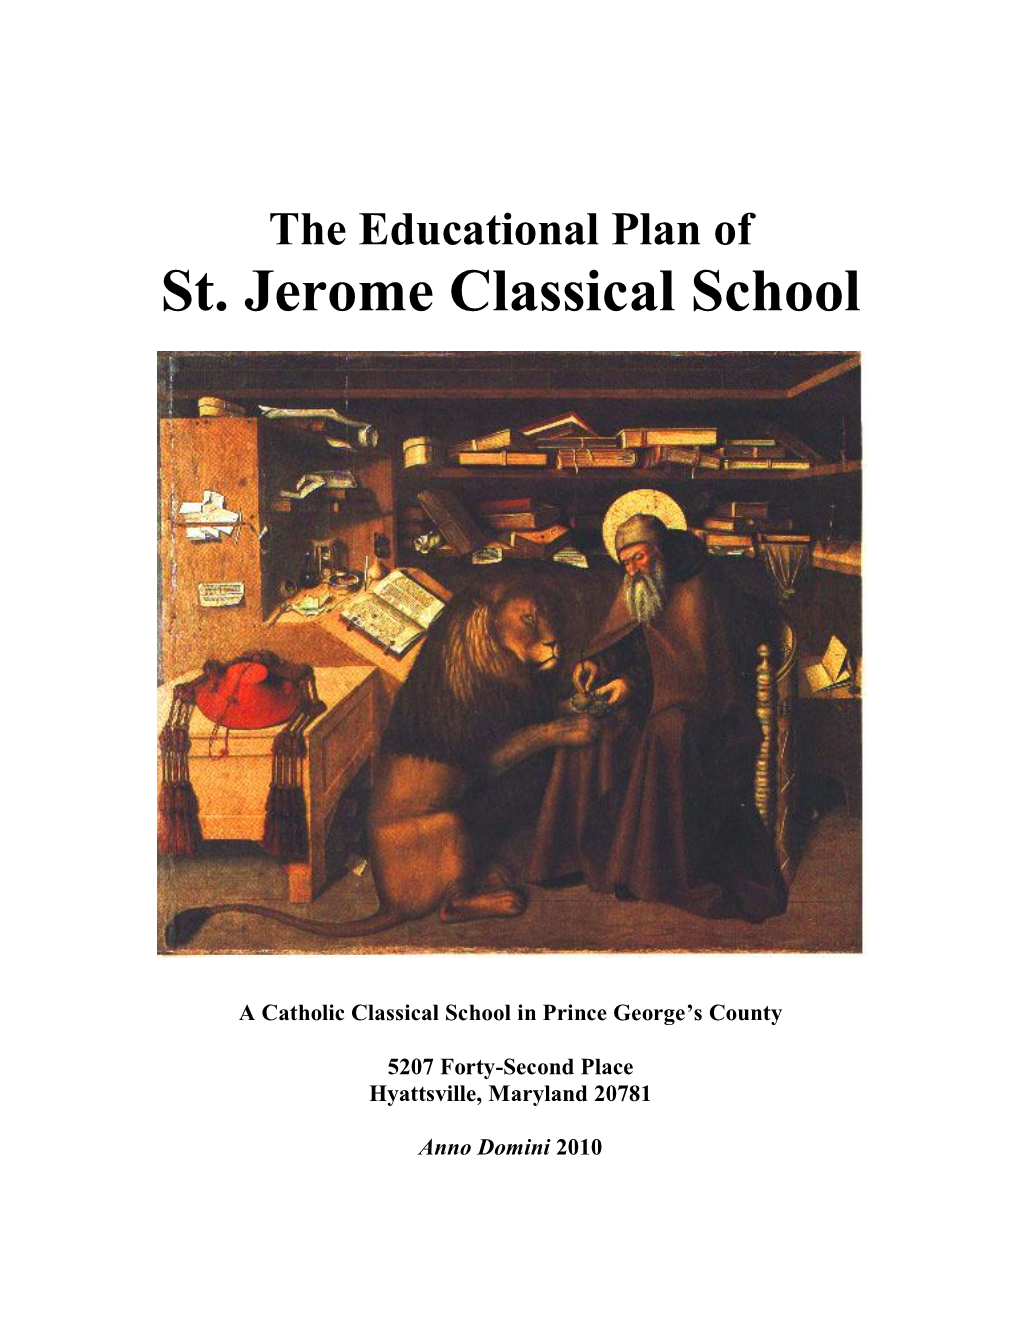 St. Jerome Classical Education Plan